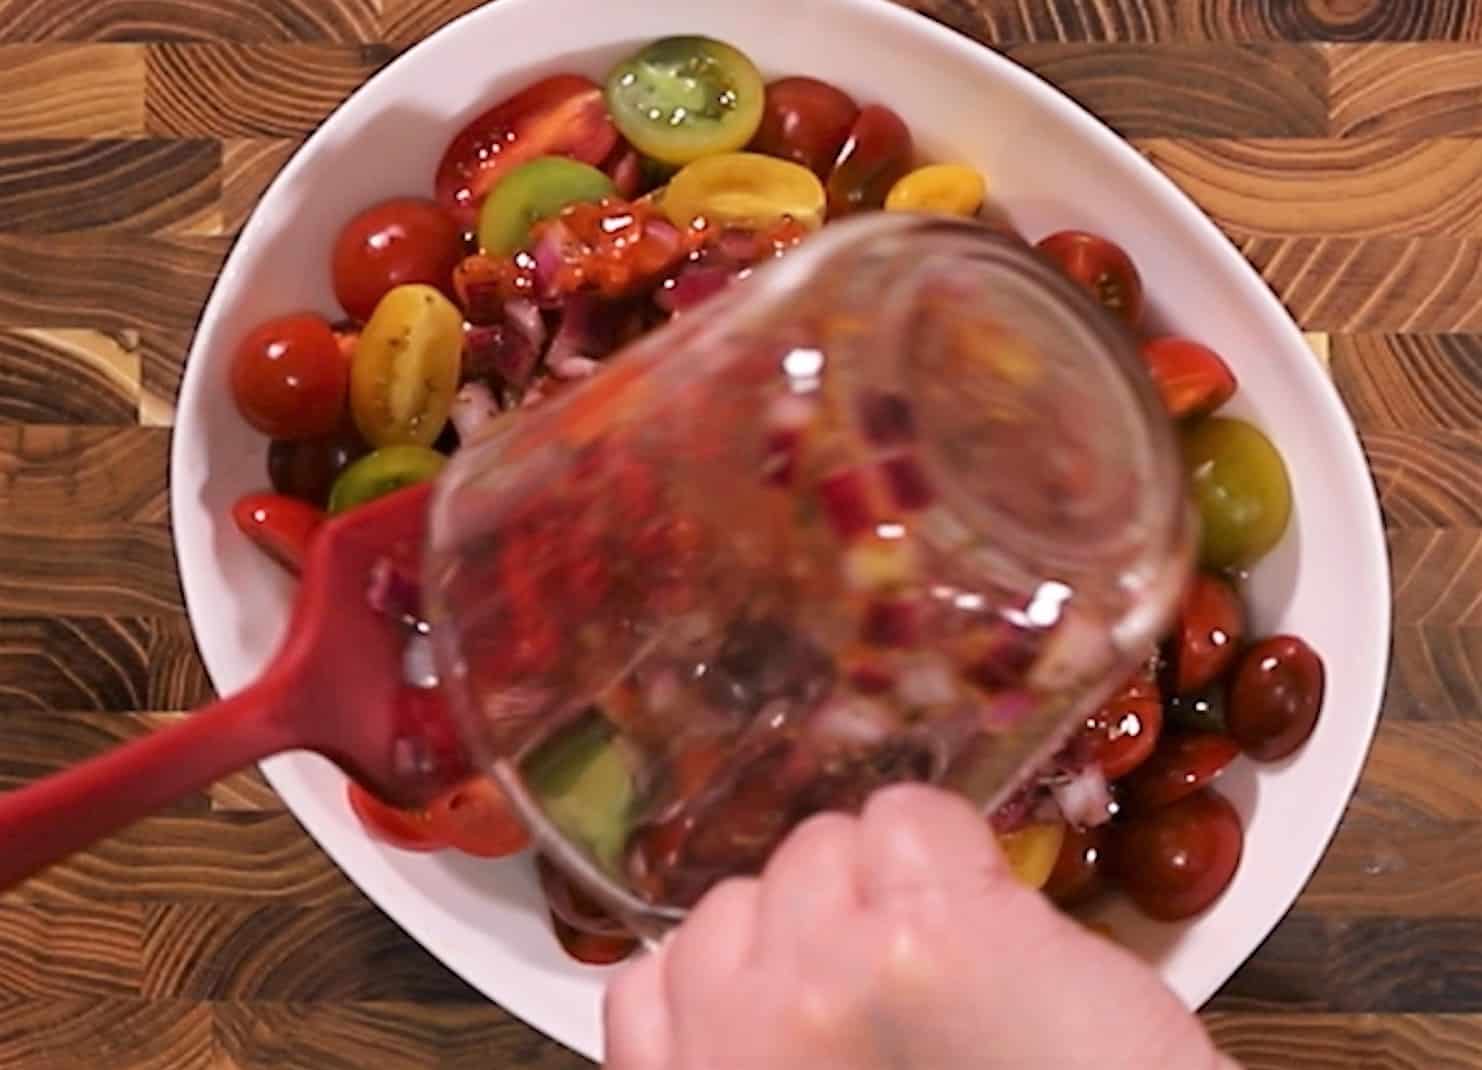 Sliced tomatoes in white serving dish with a glass measuring cup pouring marinade over the tomatoes.